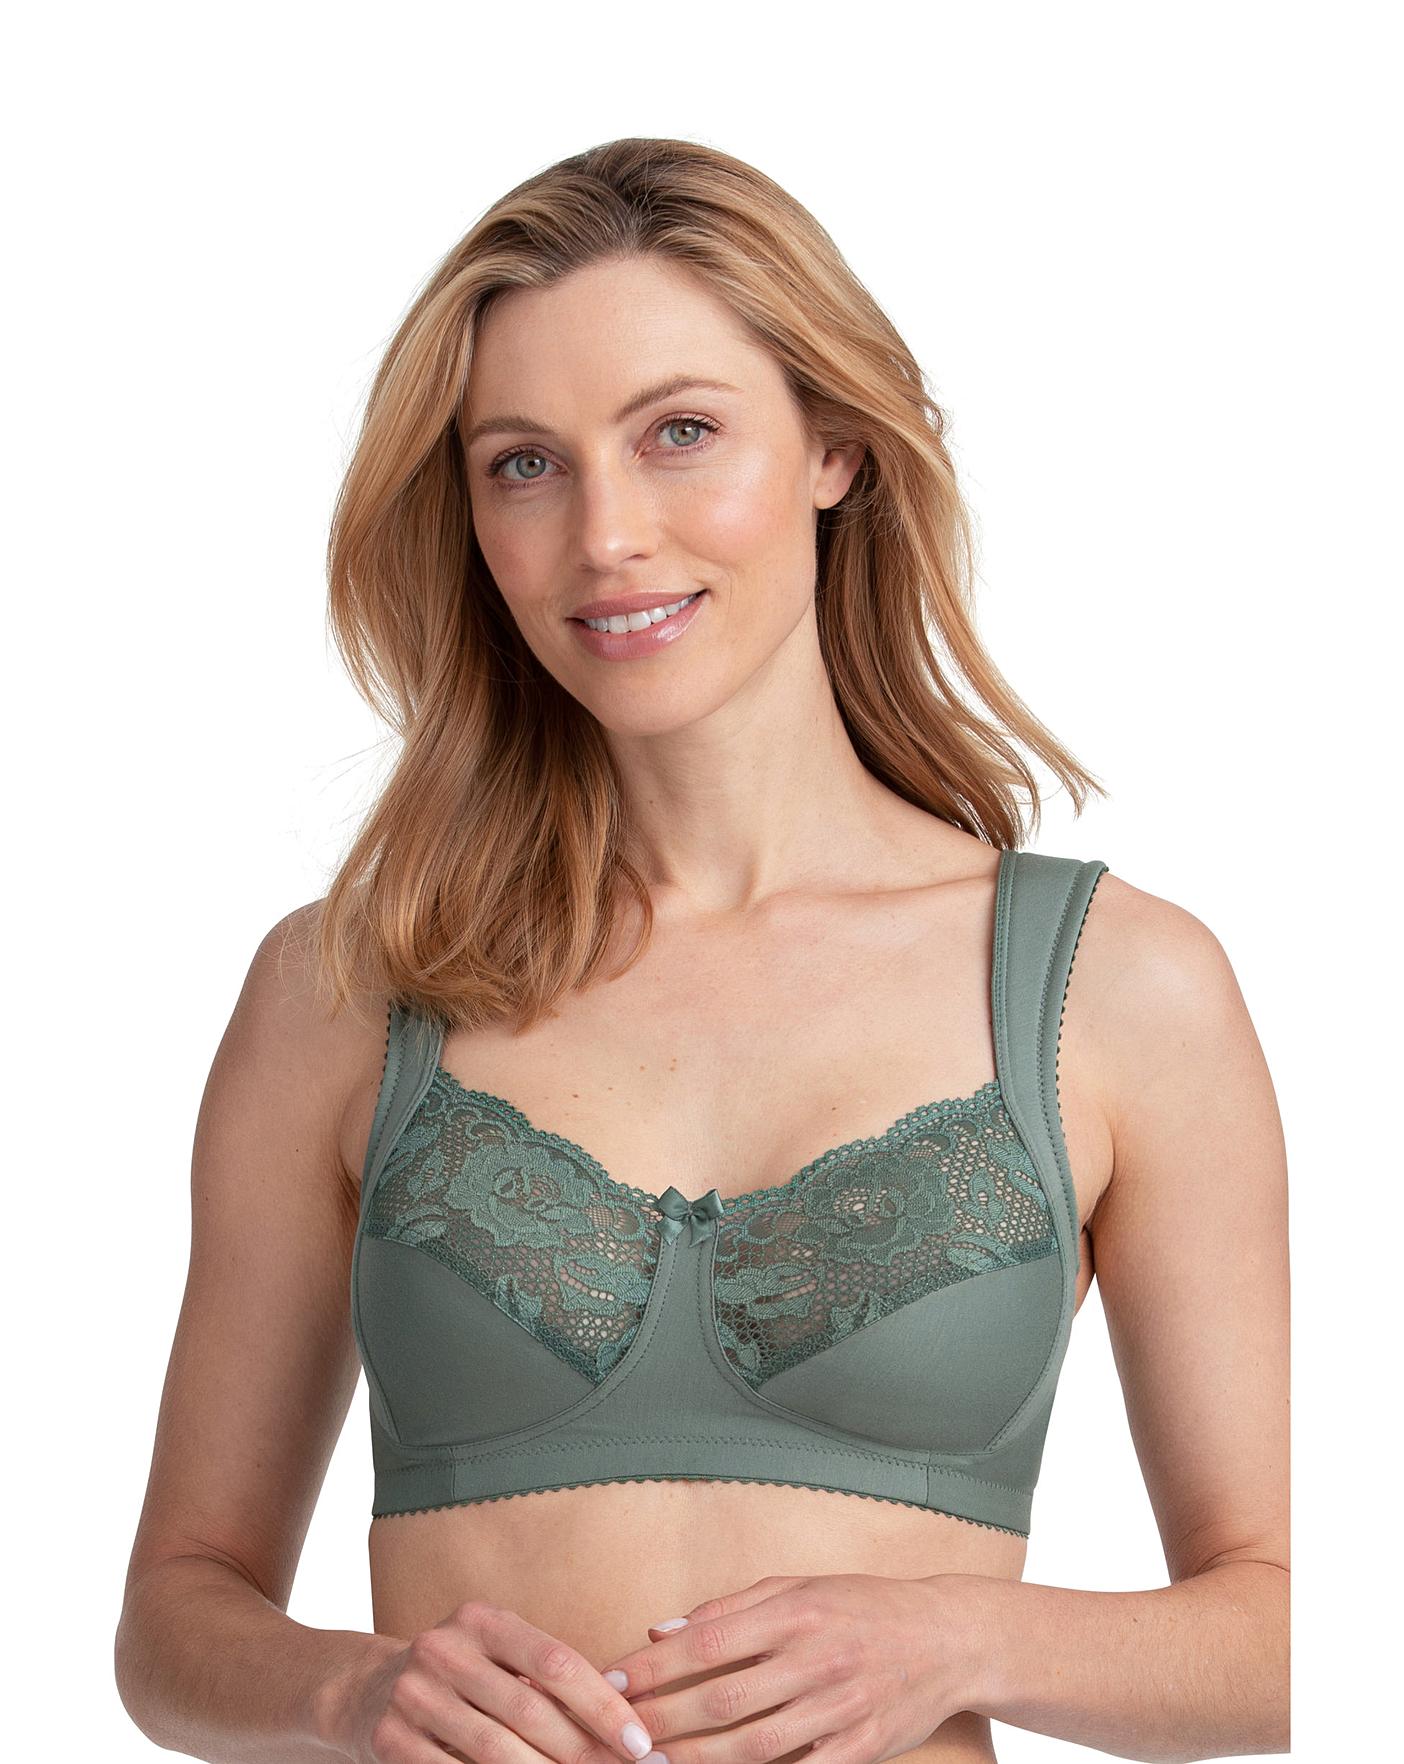 Miss Mary Lovely Lace Non Wired Bra